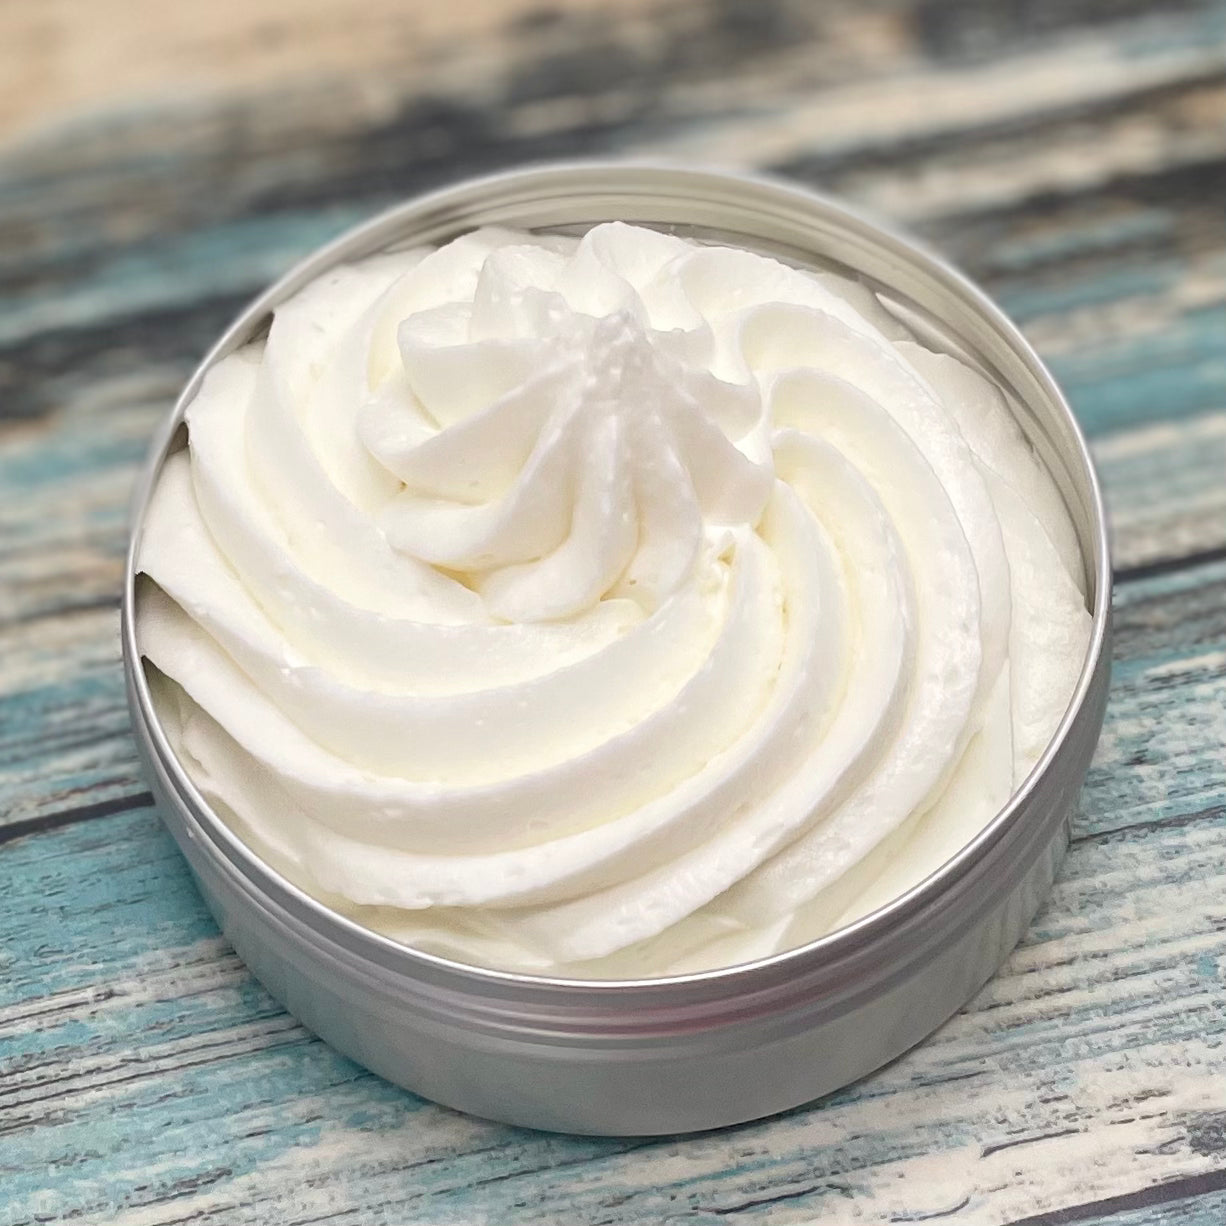 Cedarwood & Fir Whipped Tallow Skin Cream | All Natural Moisturizer and Body Butter | Made with Local Ingredients | Aluminum Container